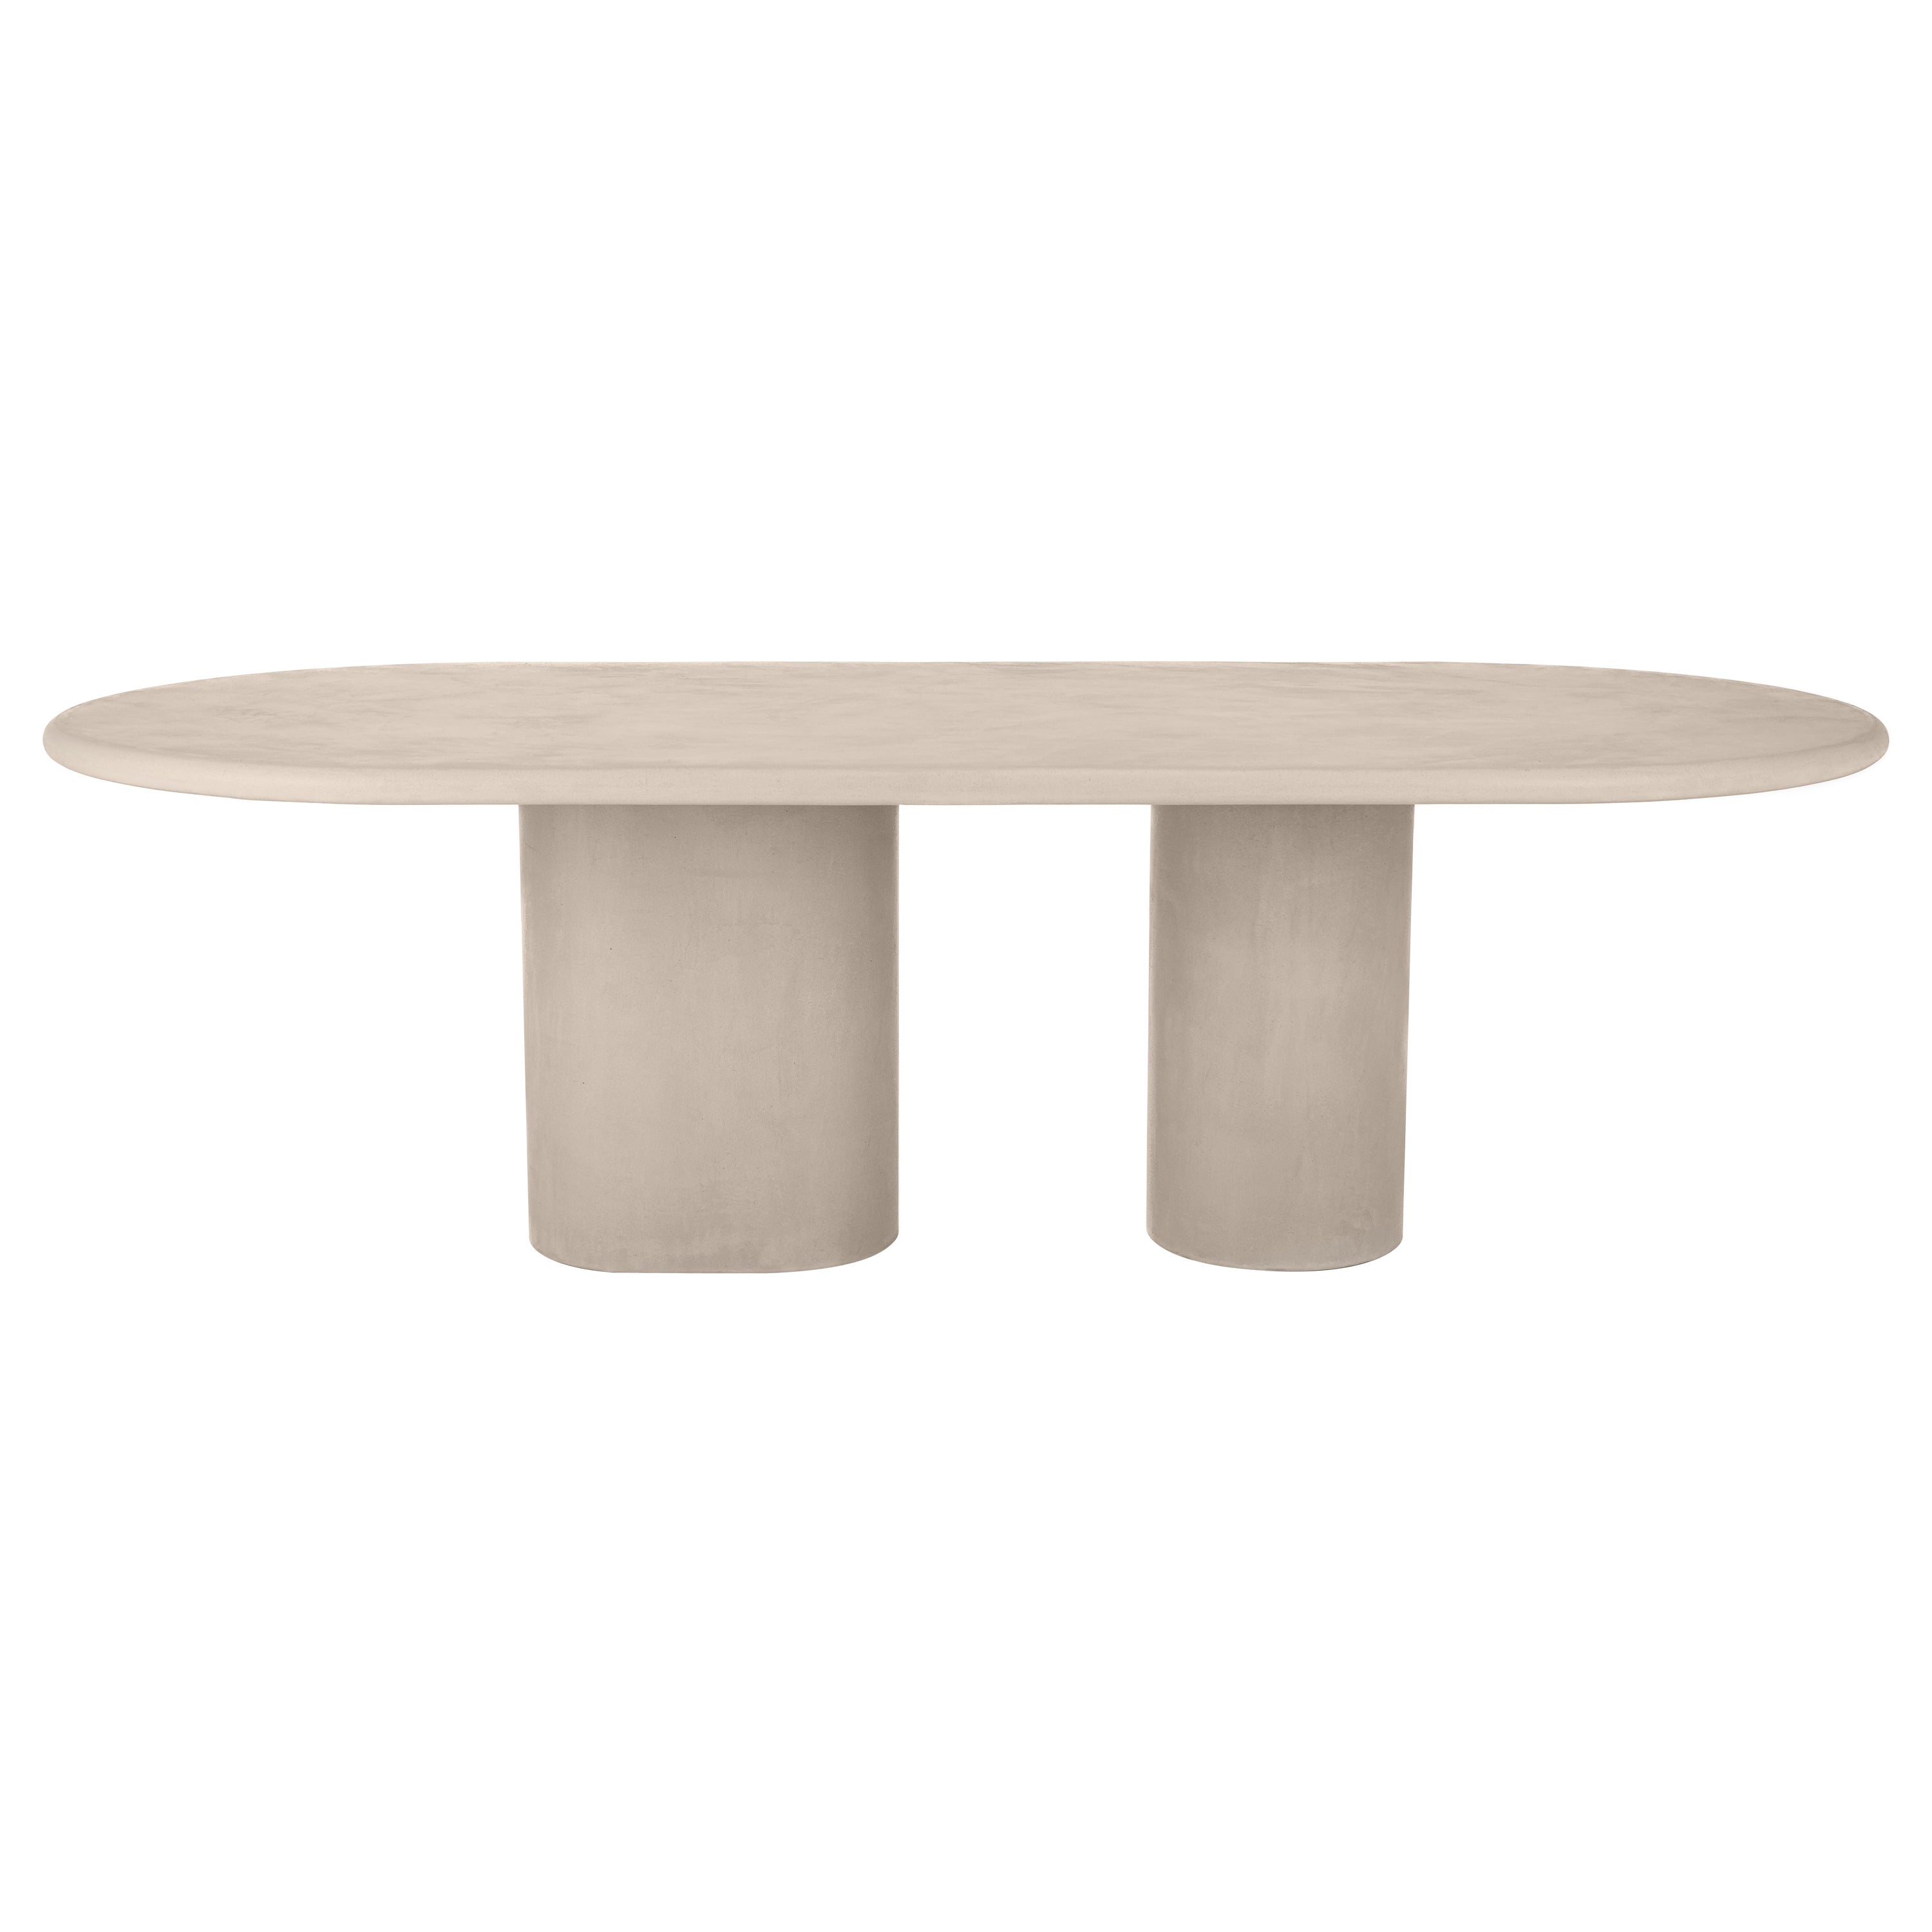 Natural Plaster Dining Table "Column" 240 by Isabelle Beaumont For Sale